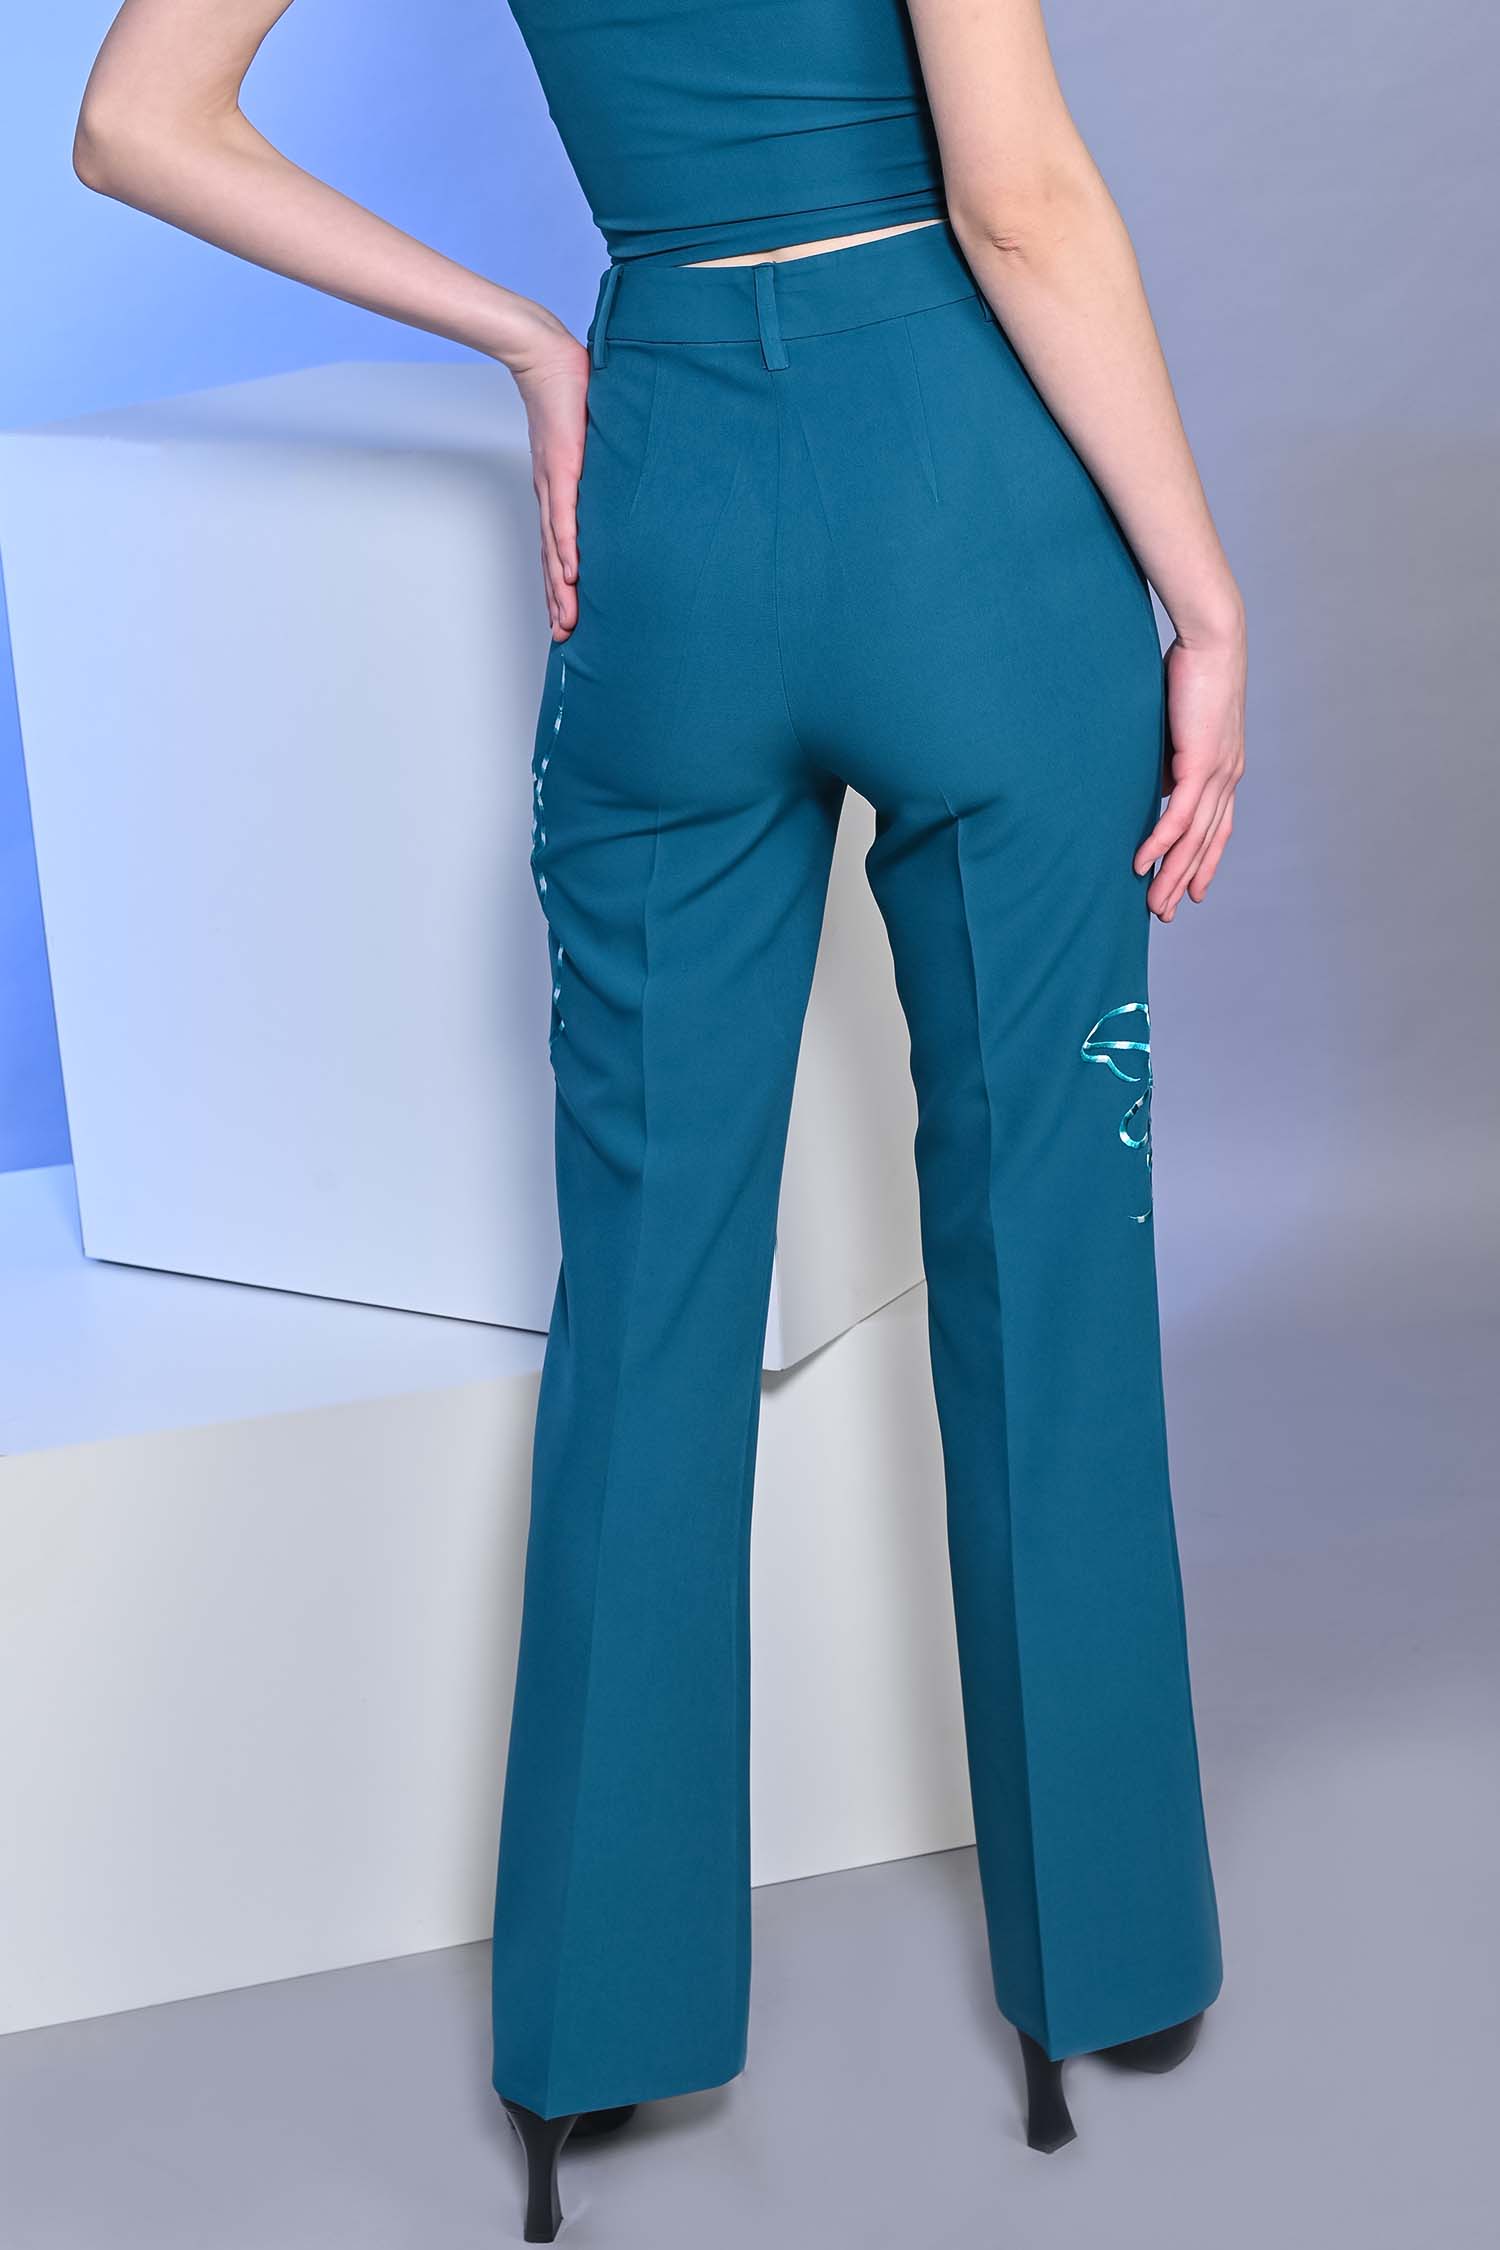 Teal Blue Embroidered Flared High Waist Trousers